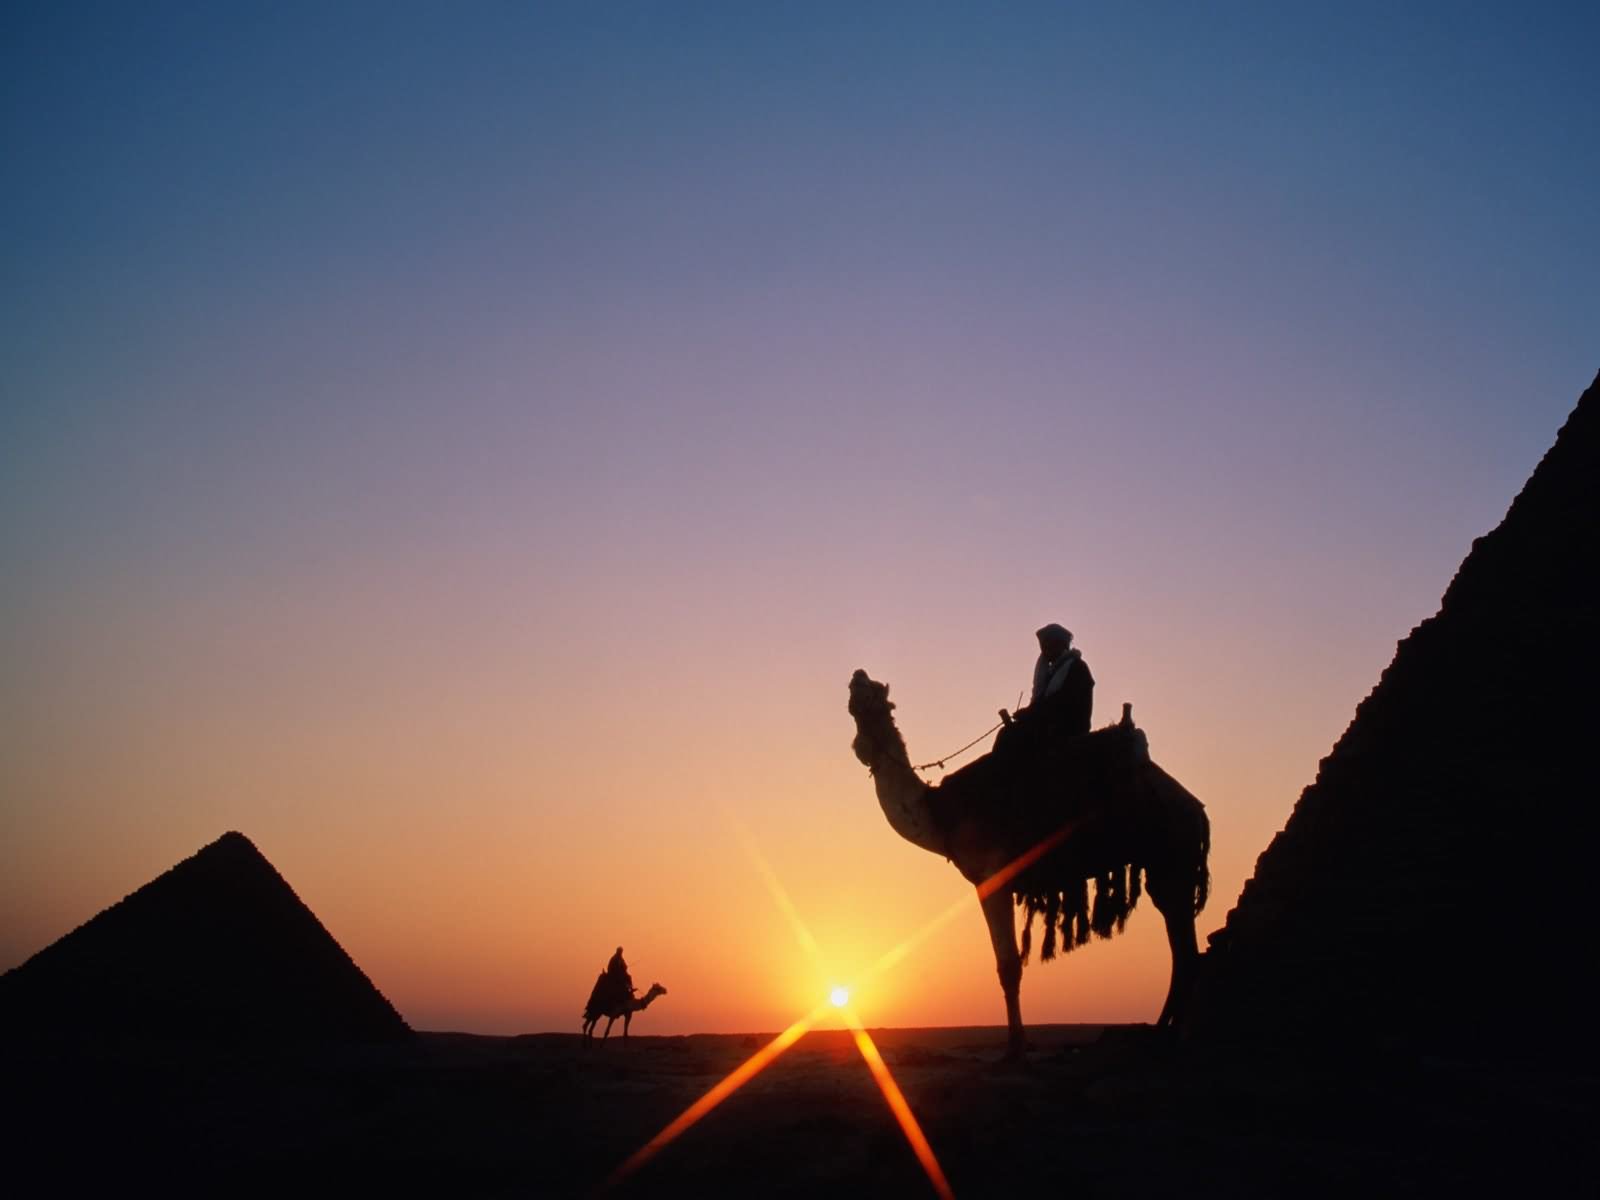 Sunset View Of Egyptian Pyramids